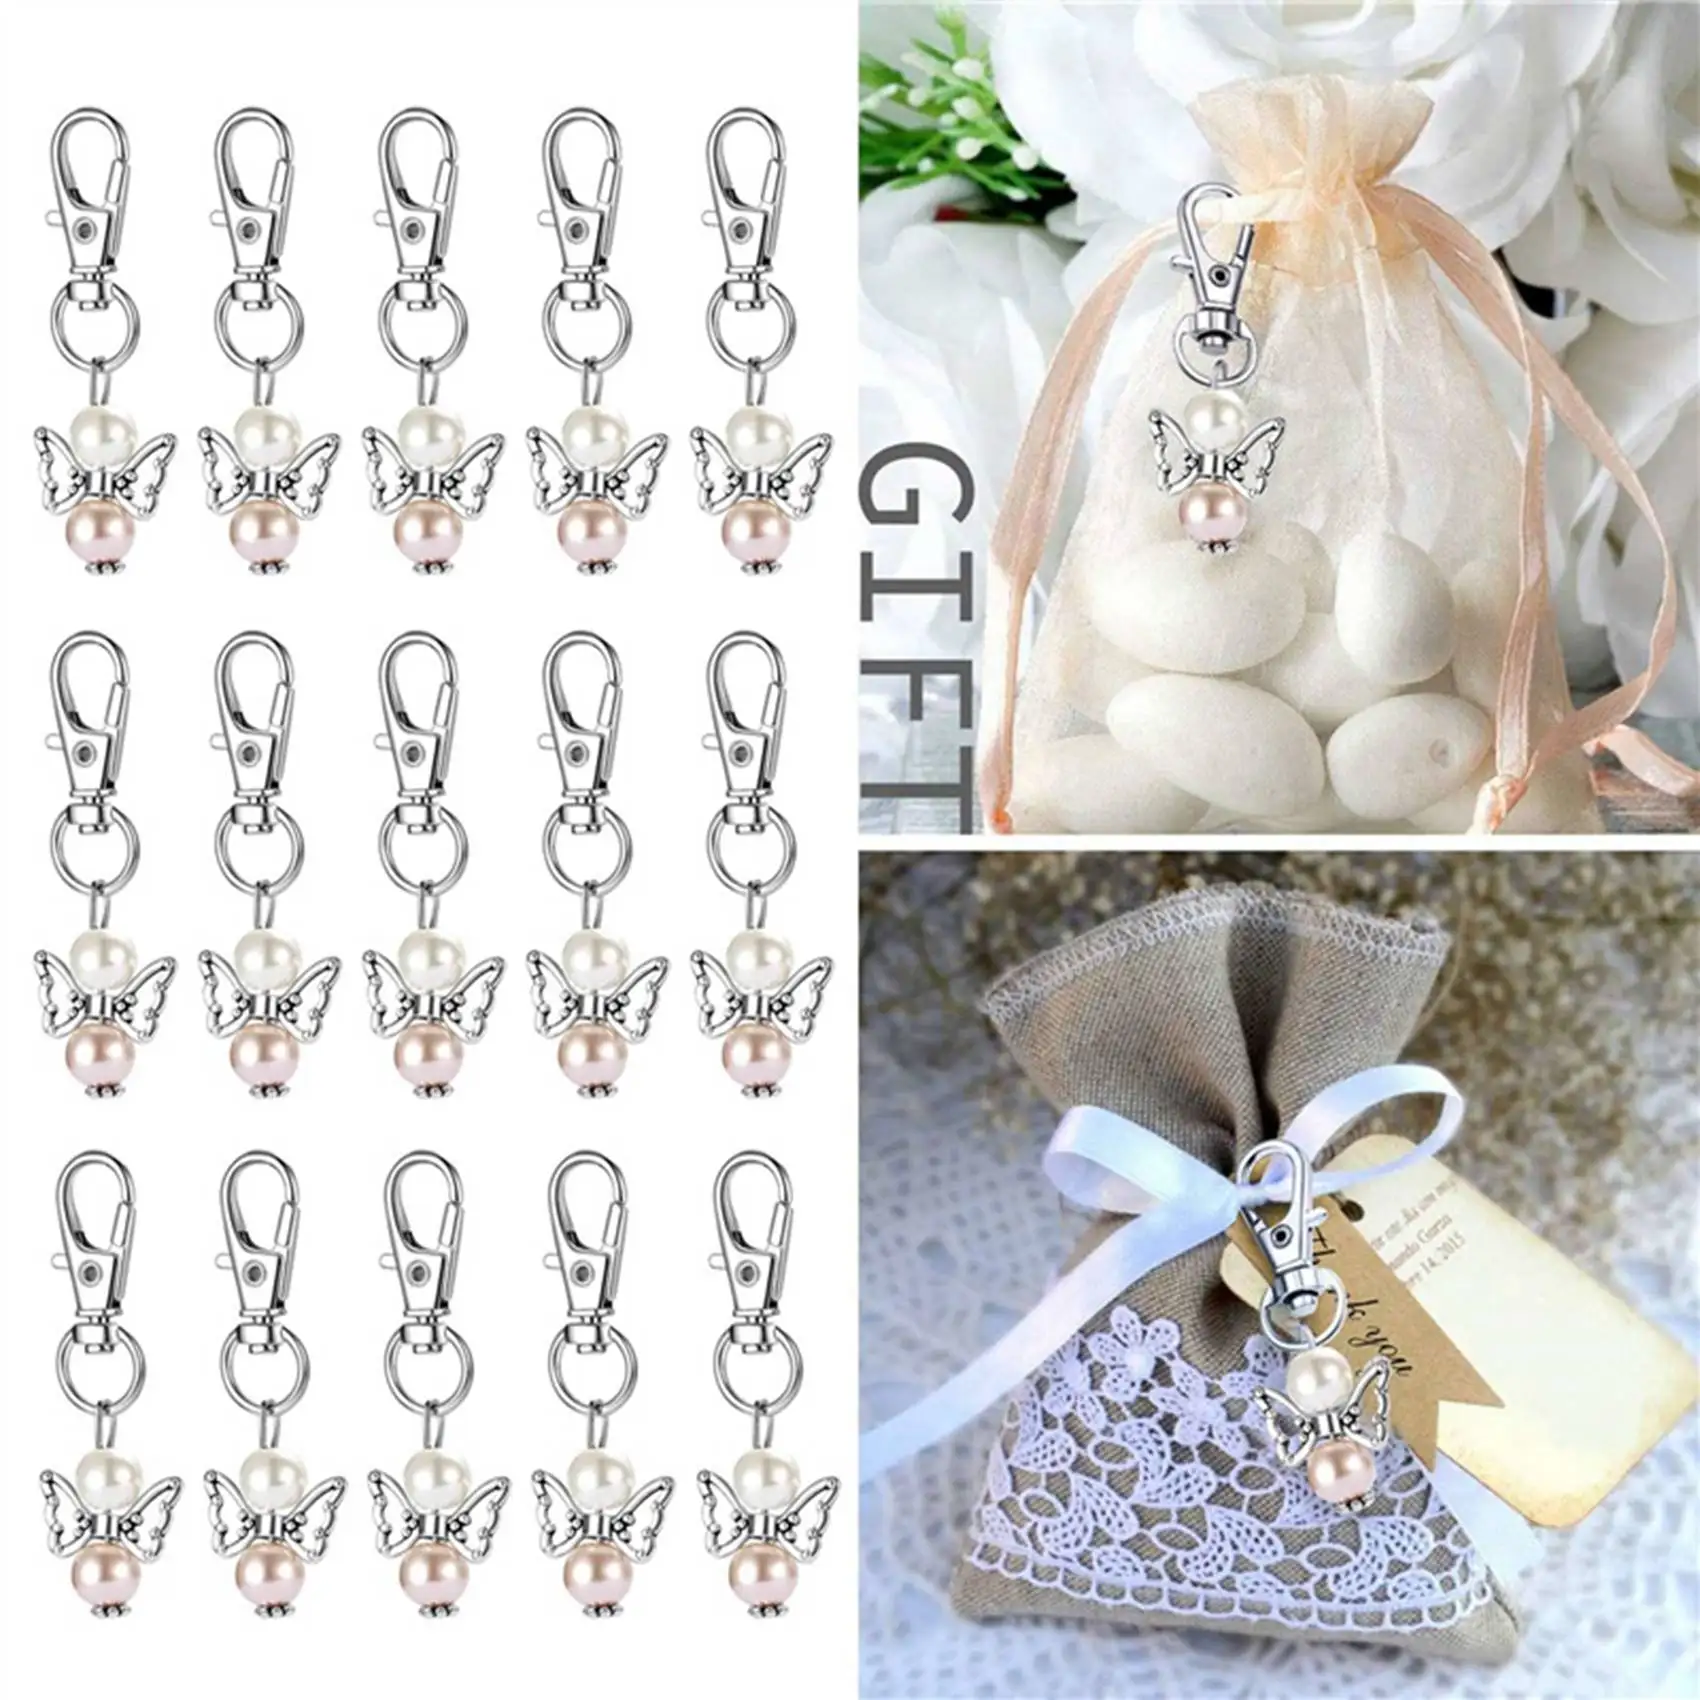 

30 Pieces Organza Bags Wedding Favors Baptism Pendants Christmas Communion Confirmation Gifts For Guests